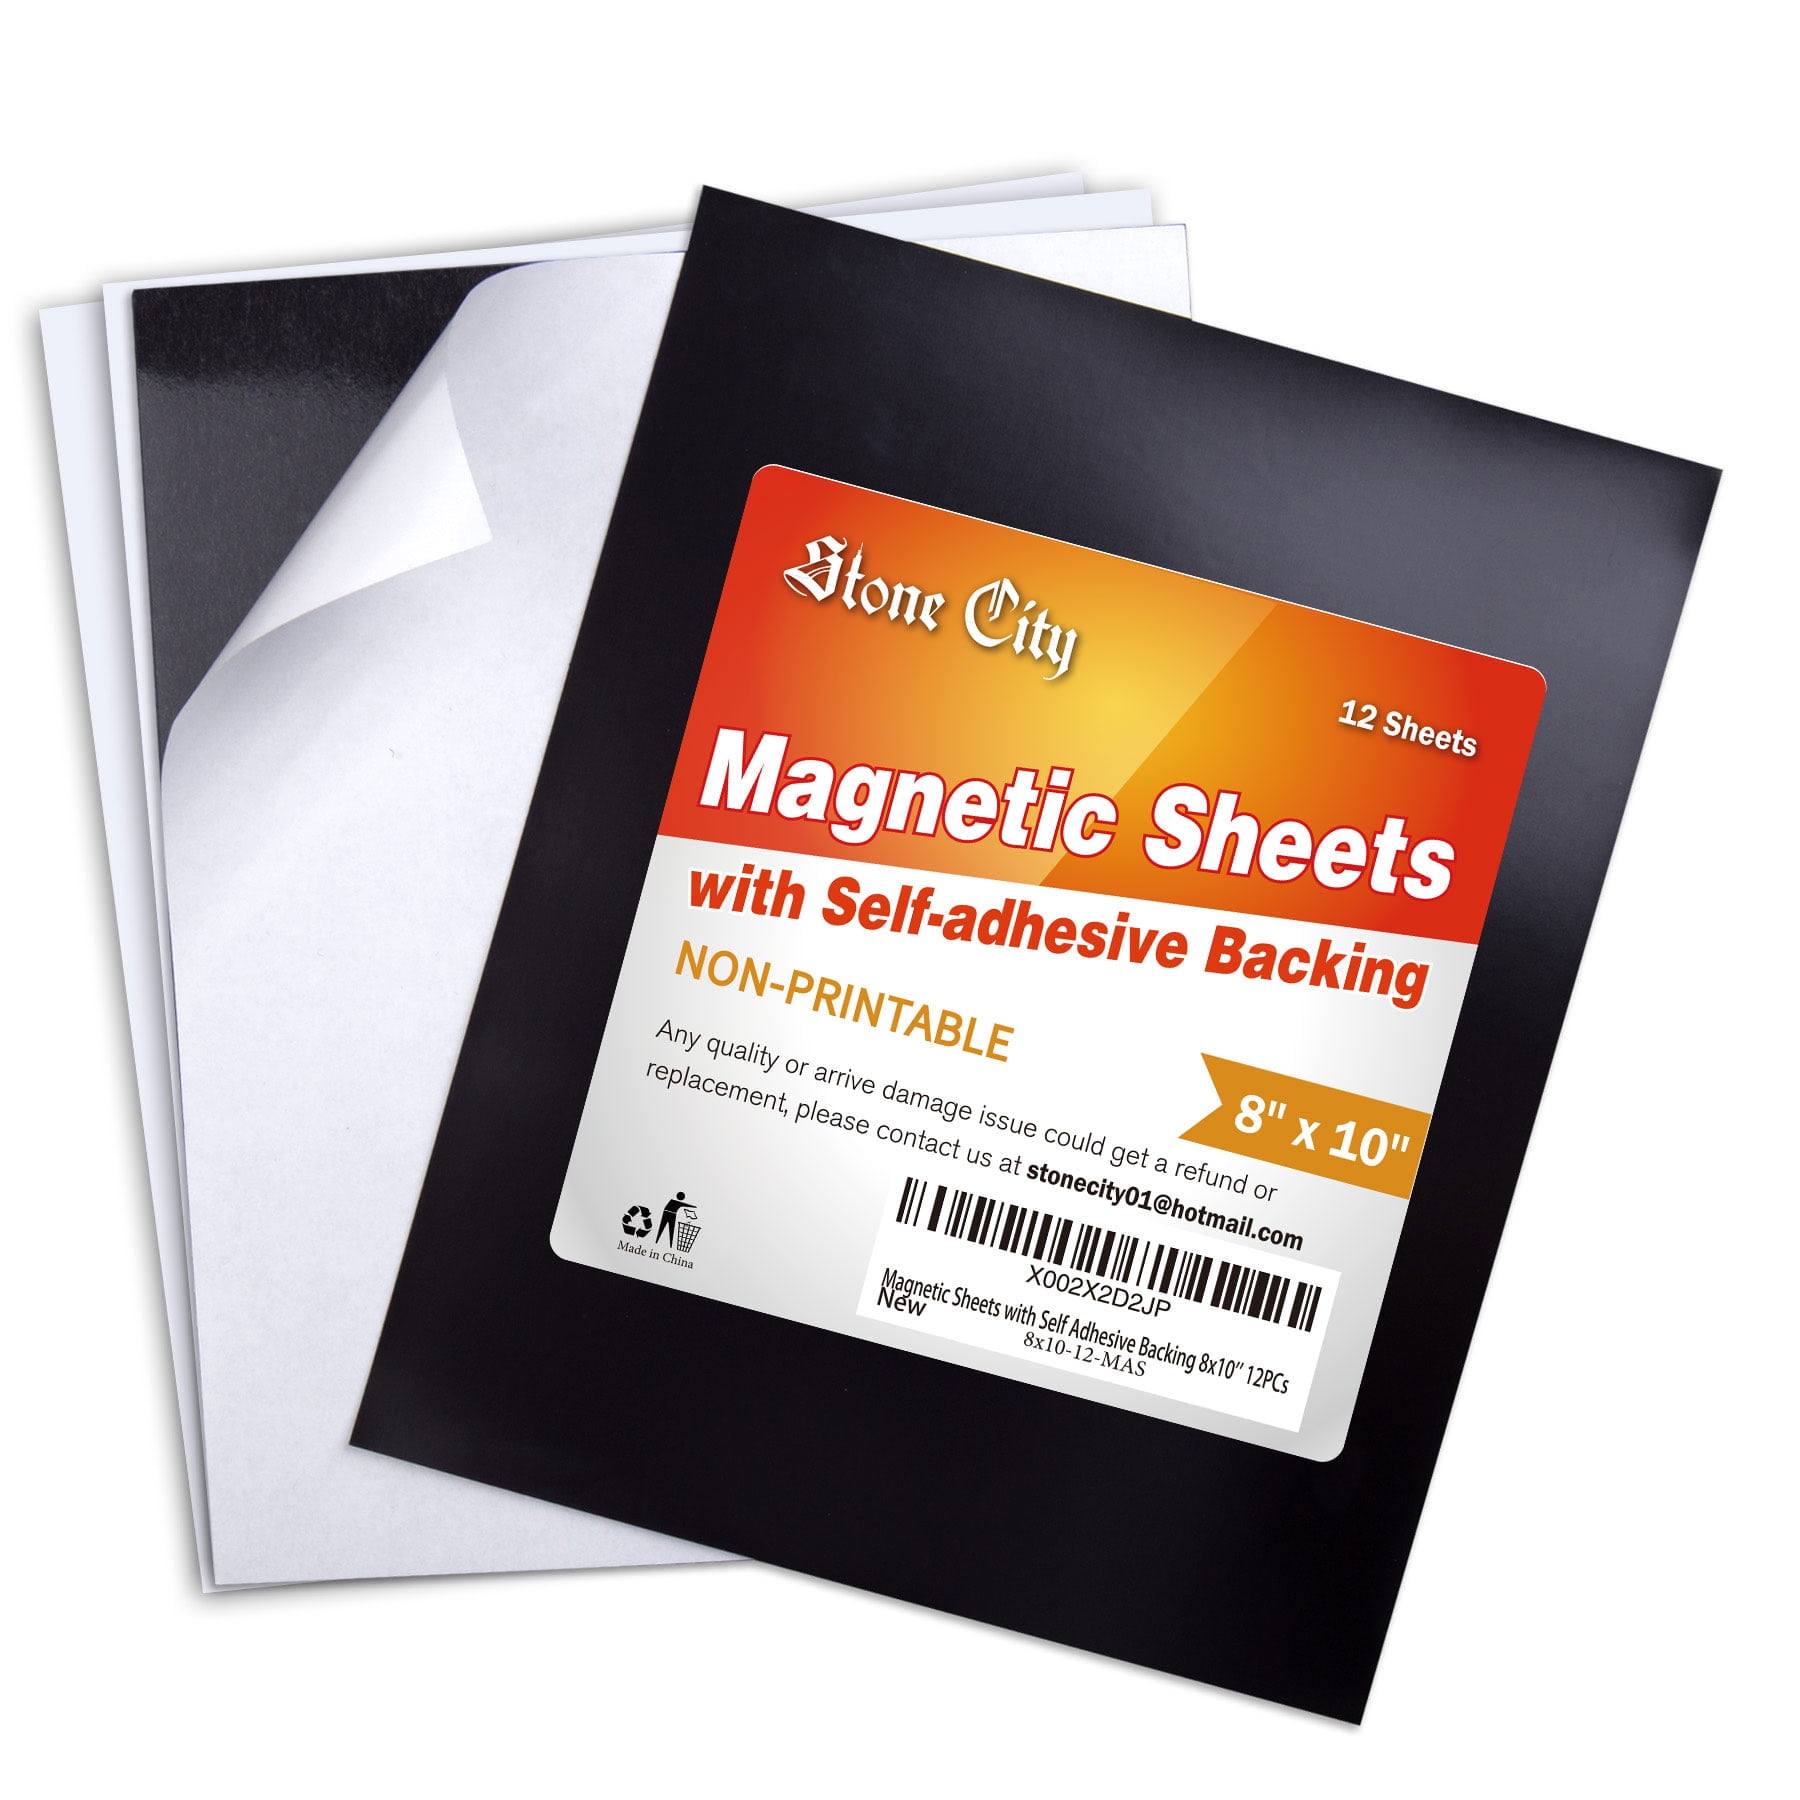  STONE CITY Adhesive Magnetic Sheets 8x10 Inch, 12 Pack Magnetic  Sheets with Adhesive Backing, Cuttable and Flexible Magnet Paper Sheets for  Crafts, Photos, Fridge : Arts, Crafts & Sewing